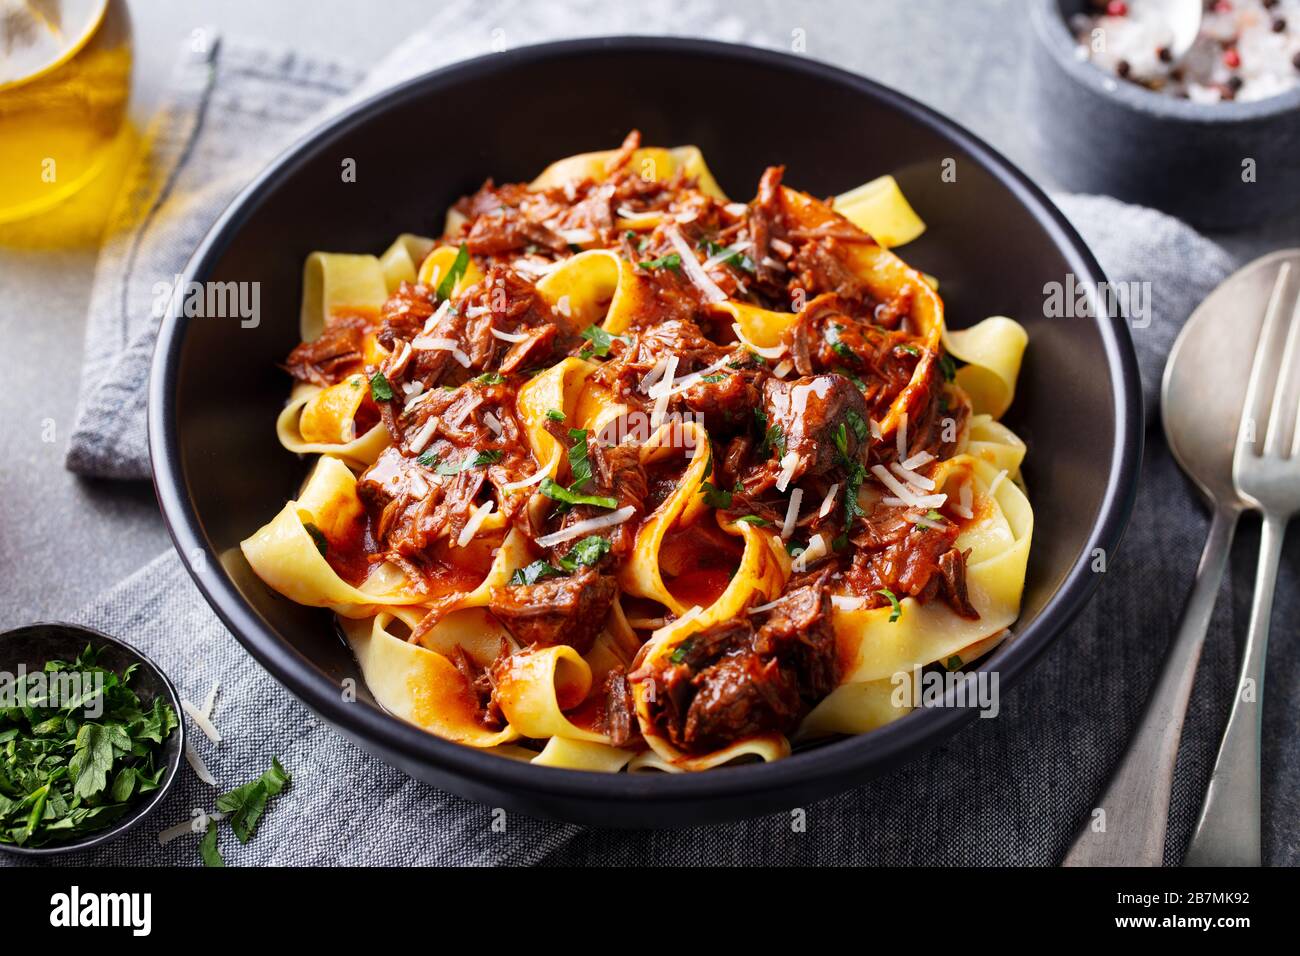 Pasta pappardelle with beef ragout sauce in black bowl. Grey background. Close up. Stock Photo